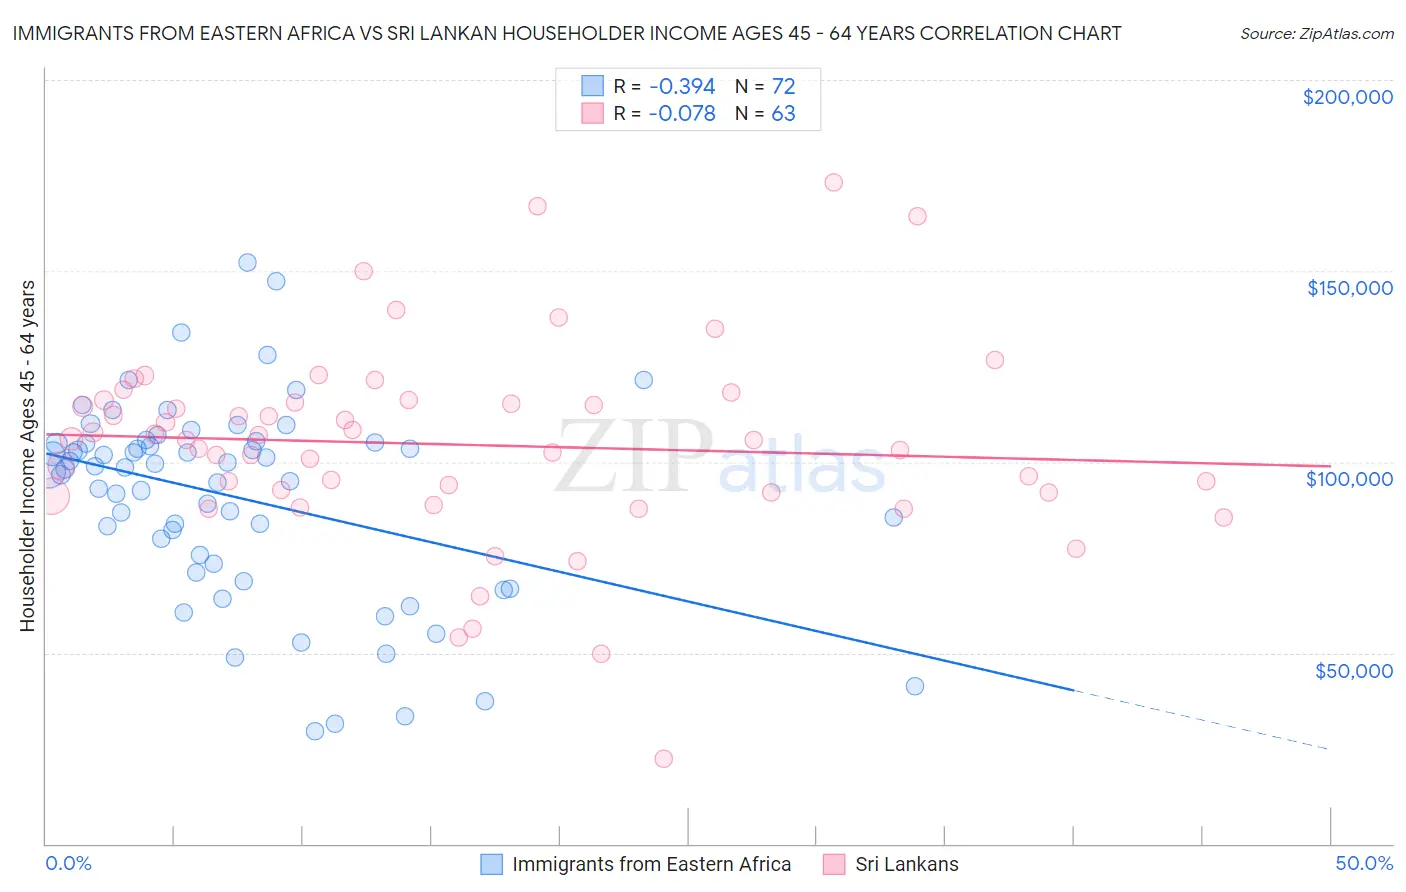 Immigrants from Eastern Africa vs Sri Lankan Householder Income Ages 45 - 64 years